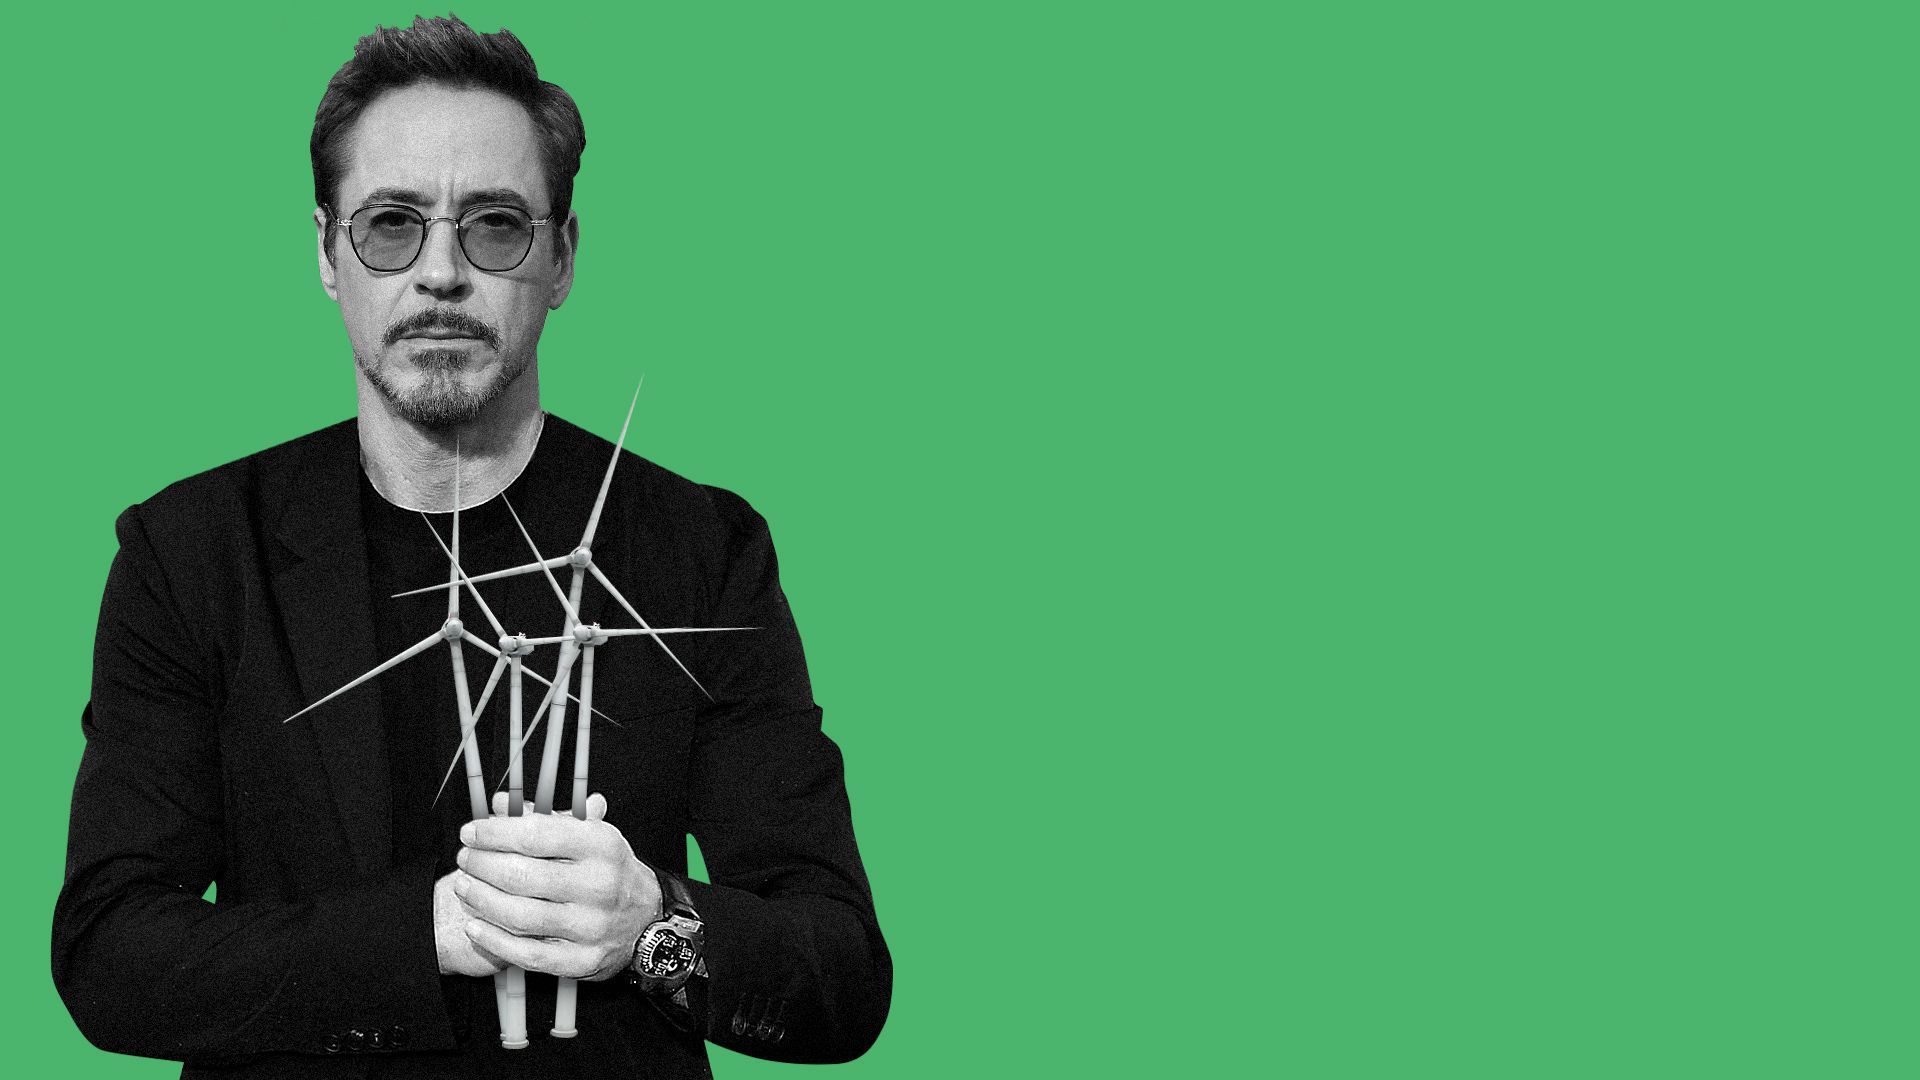 Podcast: Robert Downey Jr. launches VC funds to help save the planet